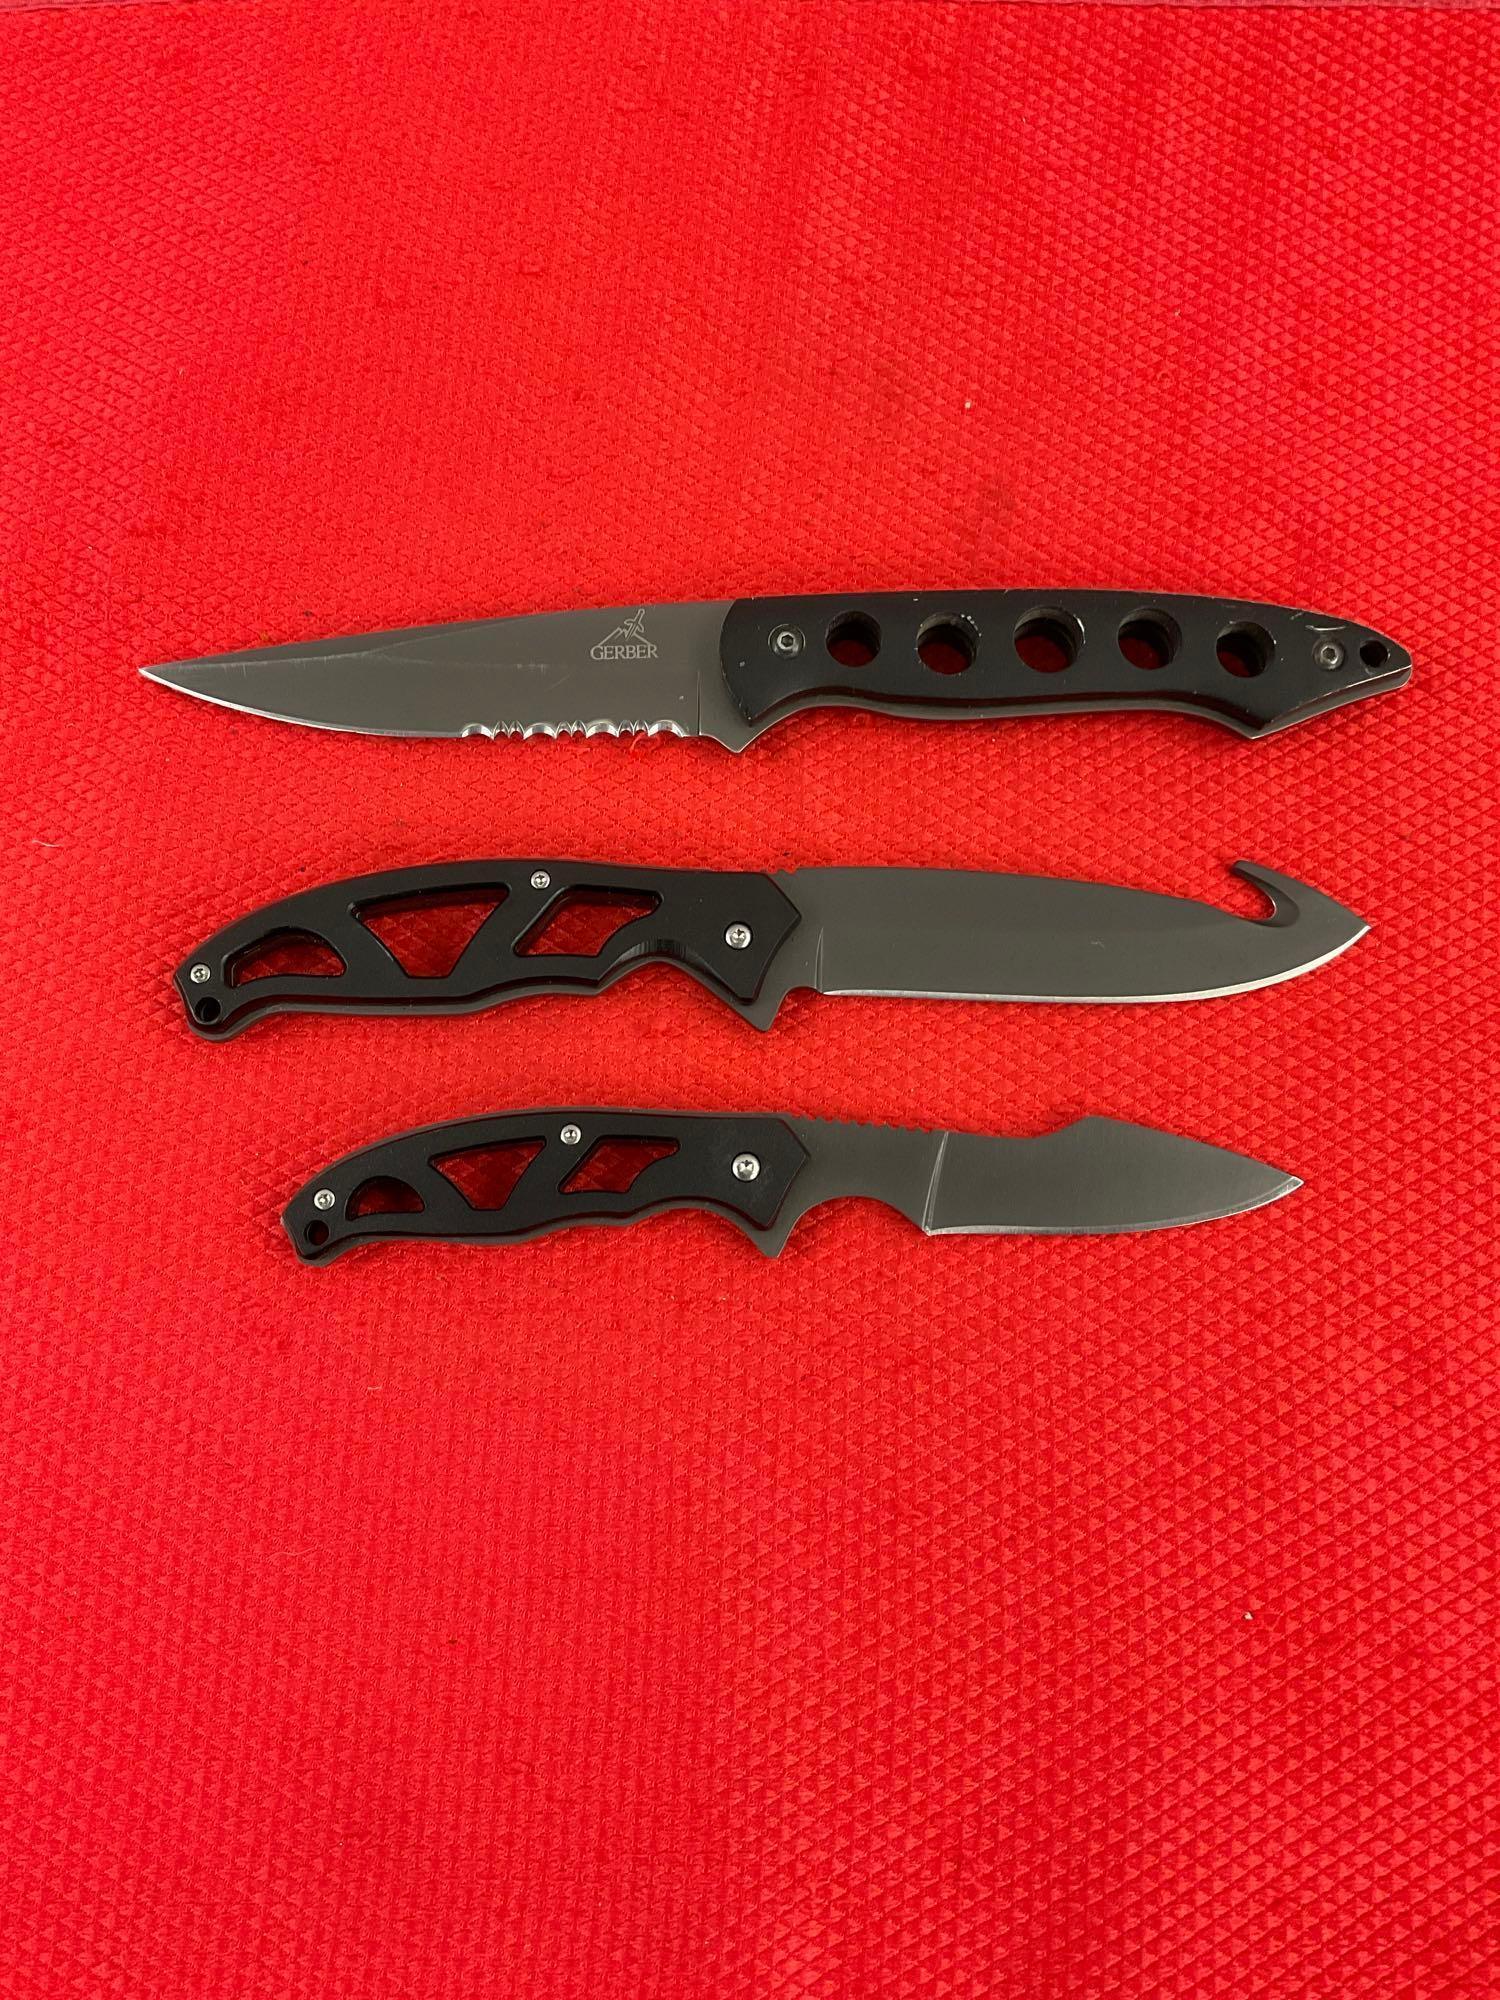 3 pcs Vintage Gerber 440 Steel Fixed Blade Hunting Knives w/ Sheathes. No Model Numbers. See pics.